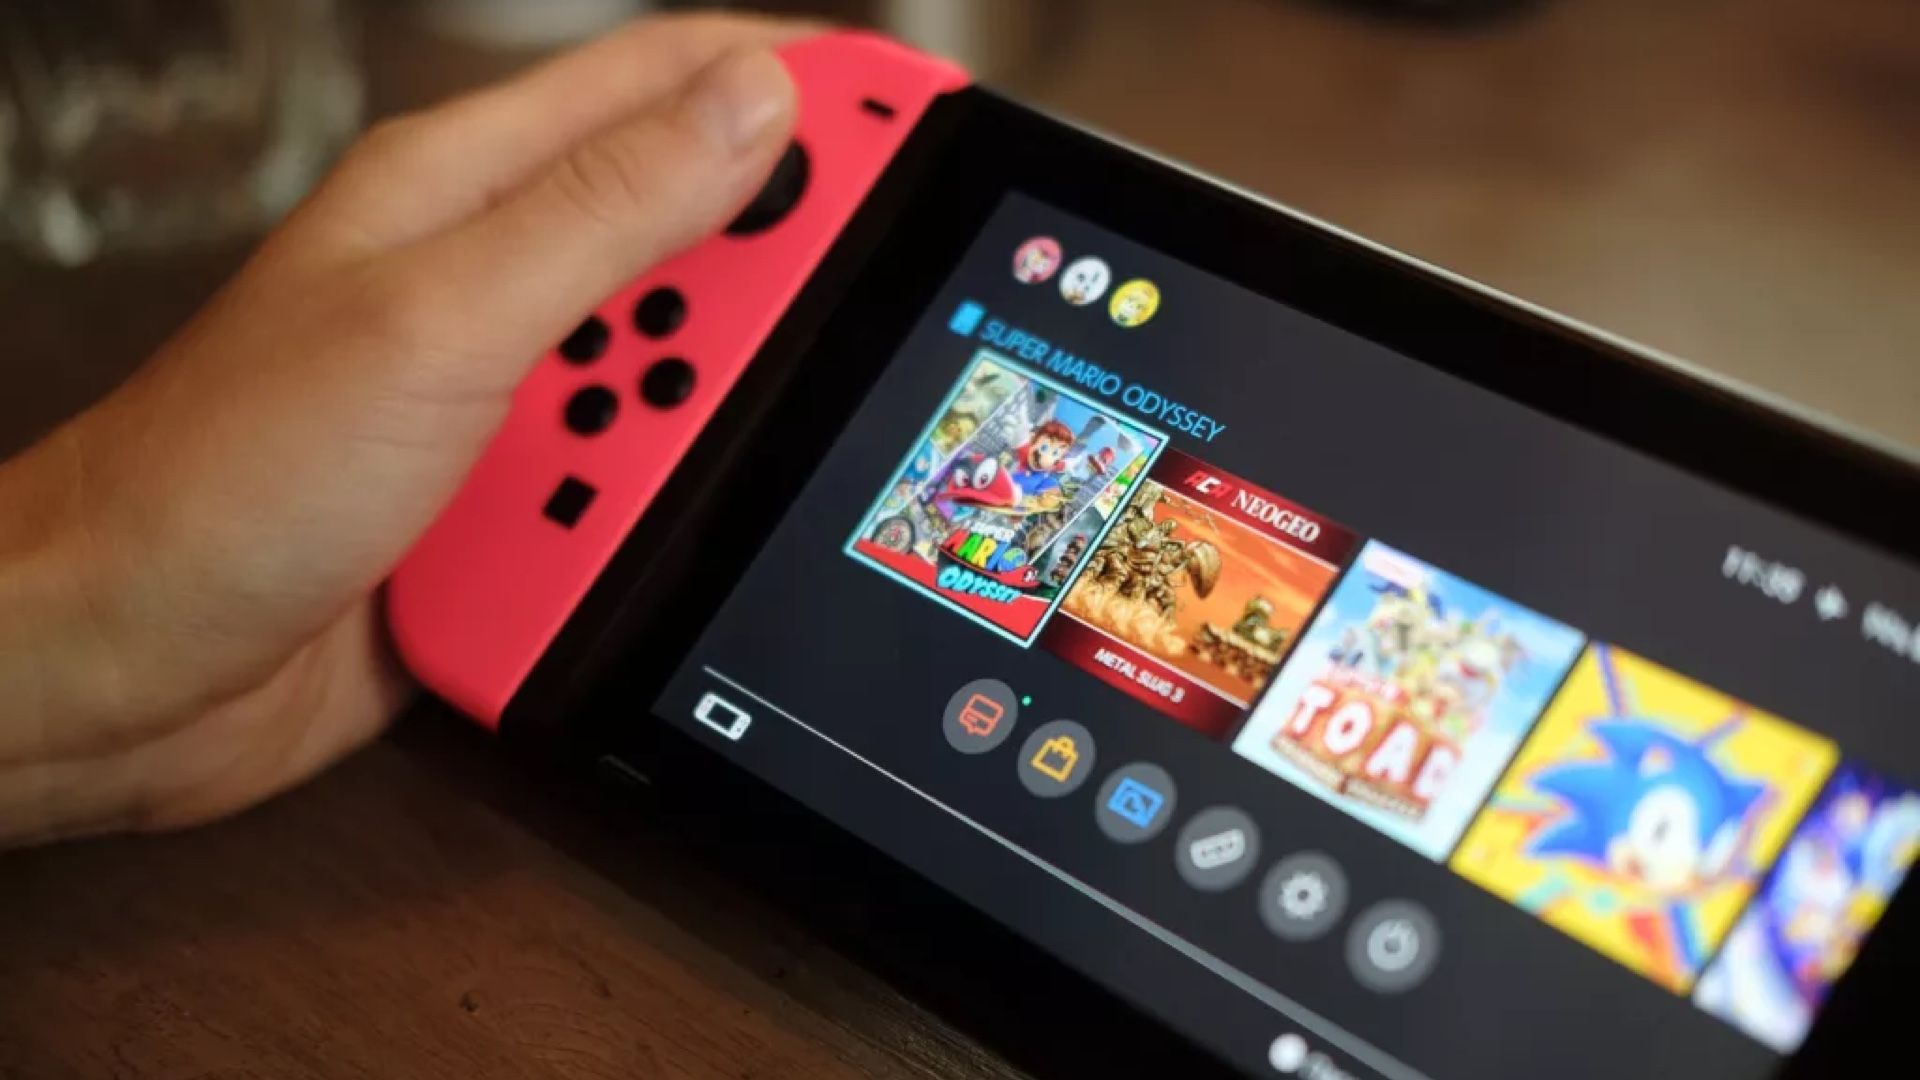 Nintendo Switch 2 release date may not be far off — here's what we know